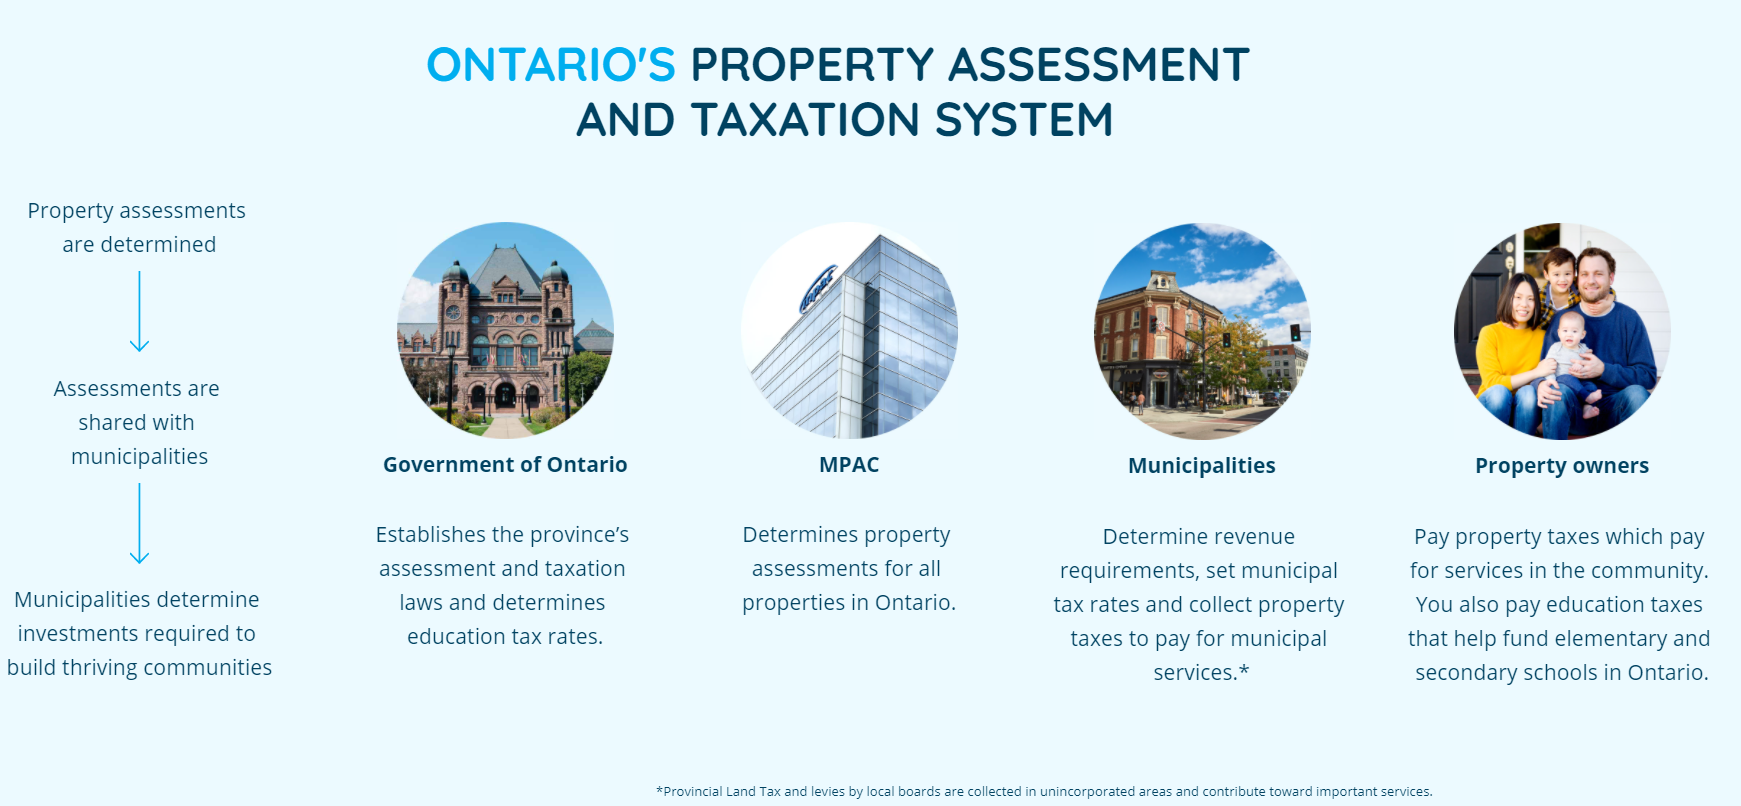 Ontario's Property Assessment and Taxation System Infographic